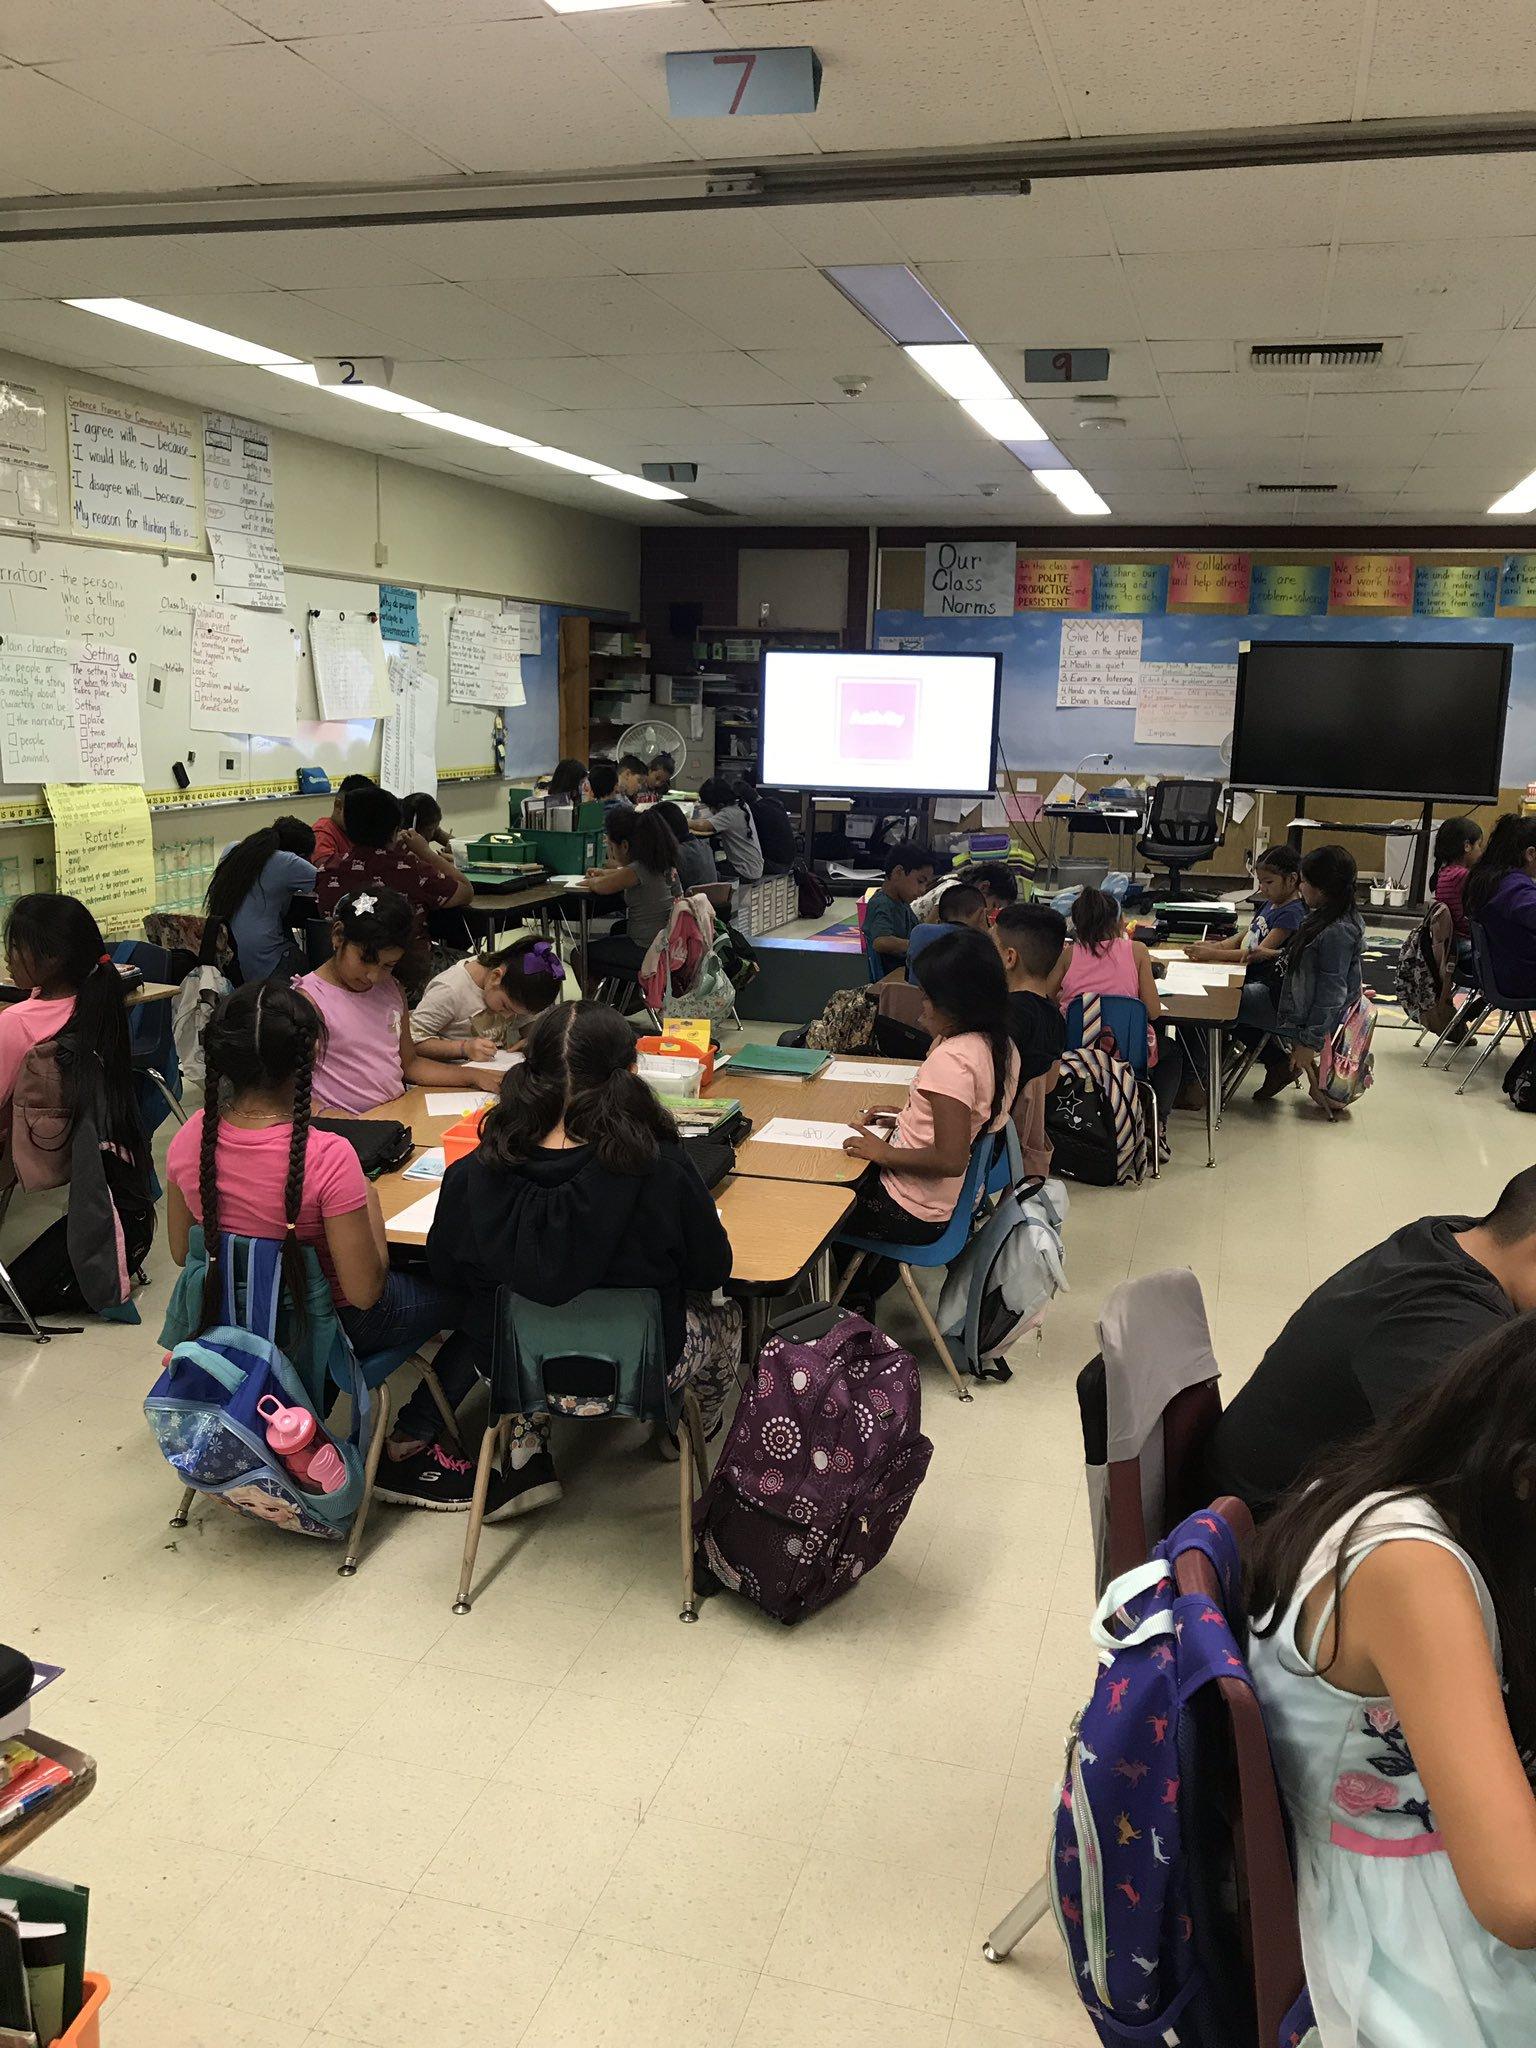 Ms. Willard is showing her students how to make friends. Students read "Making Friends is an Art" by #JuliaCook. One student wrote "I can stand up for everyone if they are being bullied" Alcott Eagles SOAR! #proud2bepusd